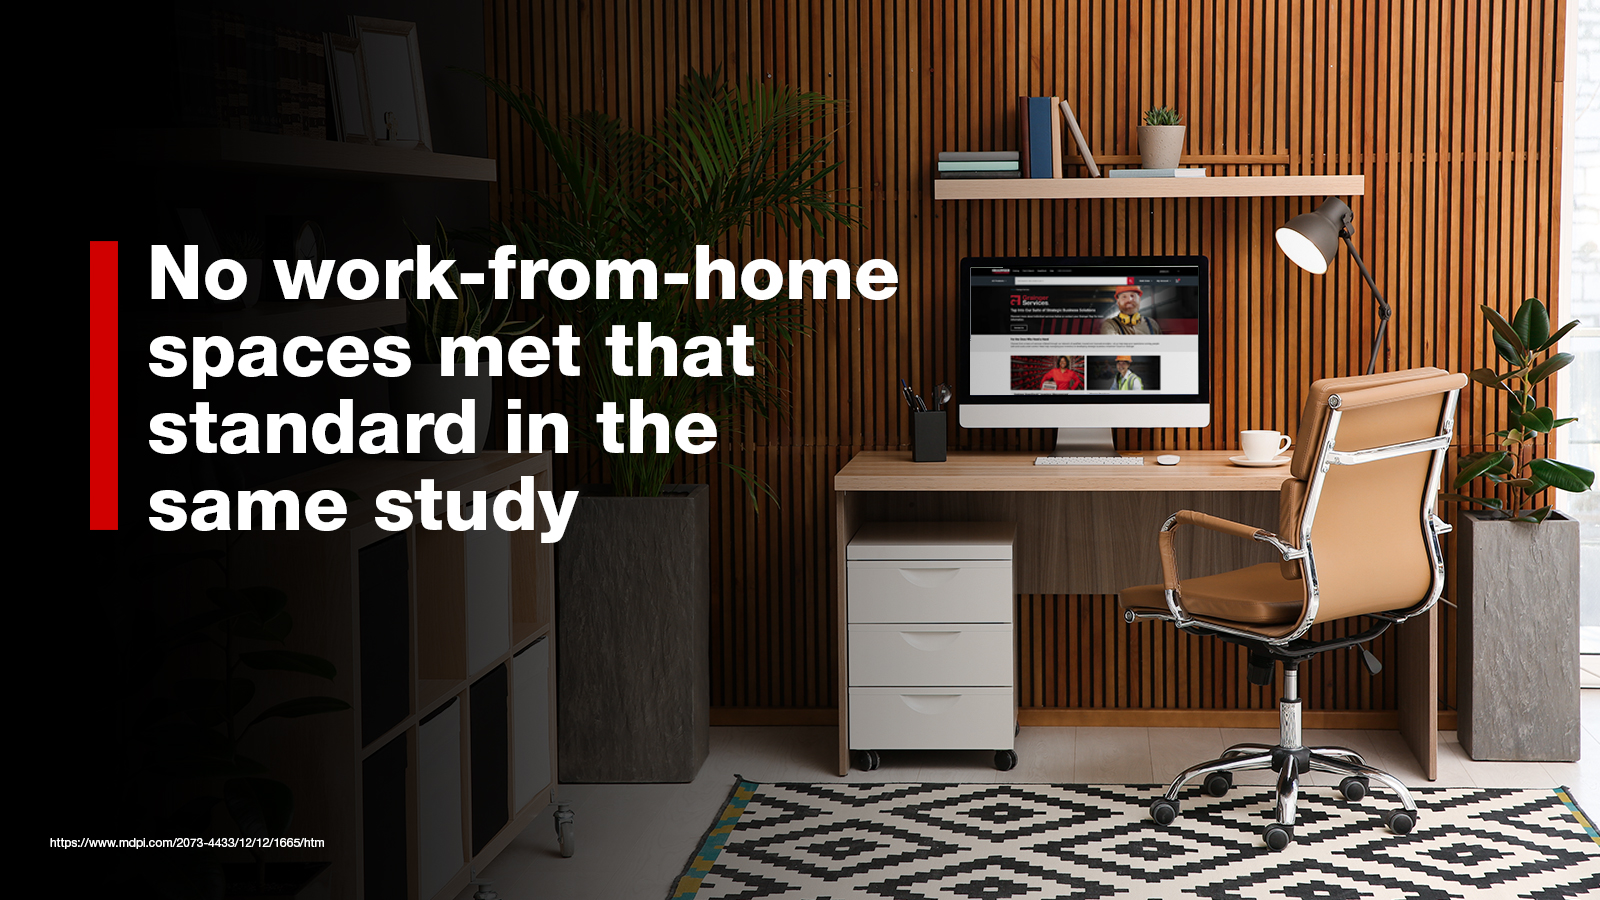 No work from home spaces met that same standard in the study